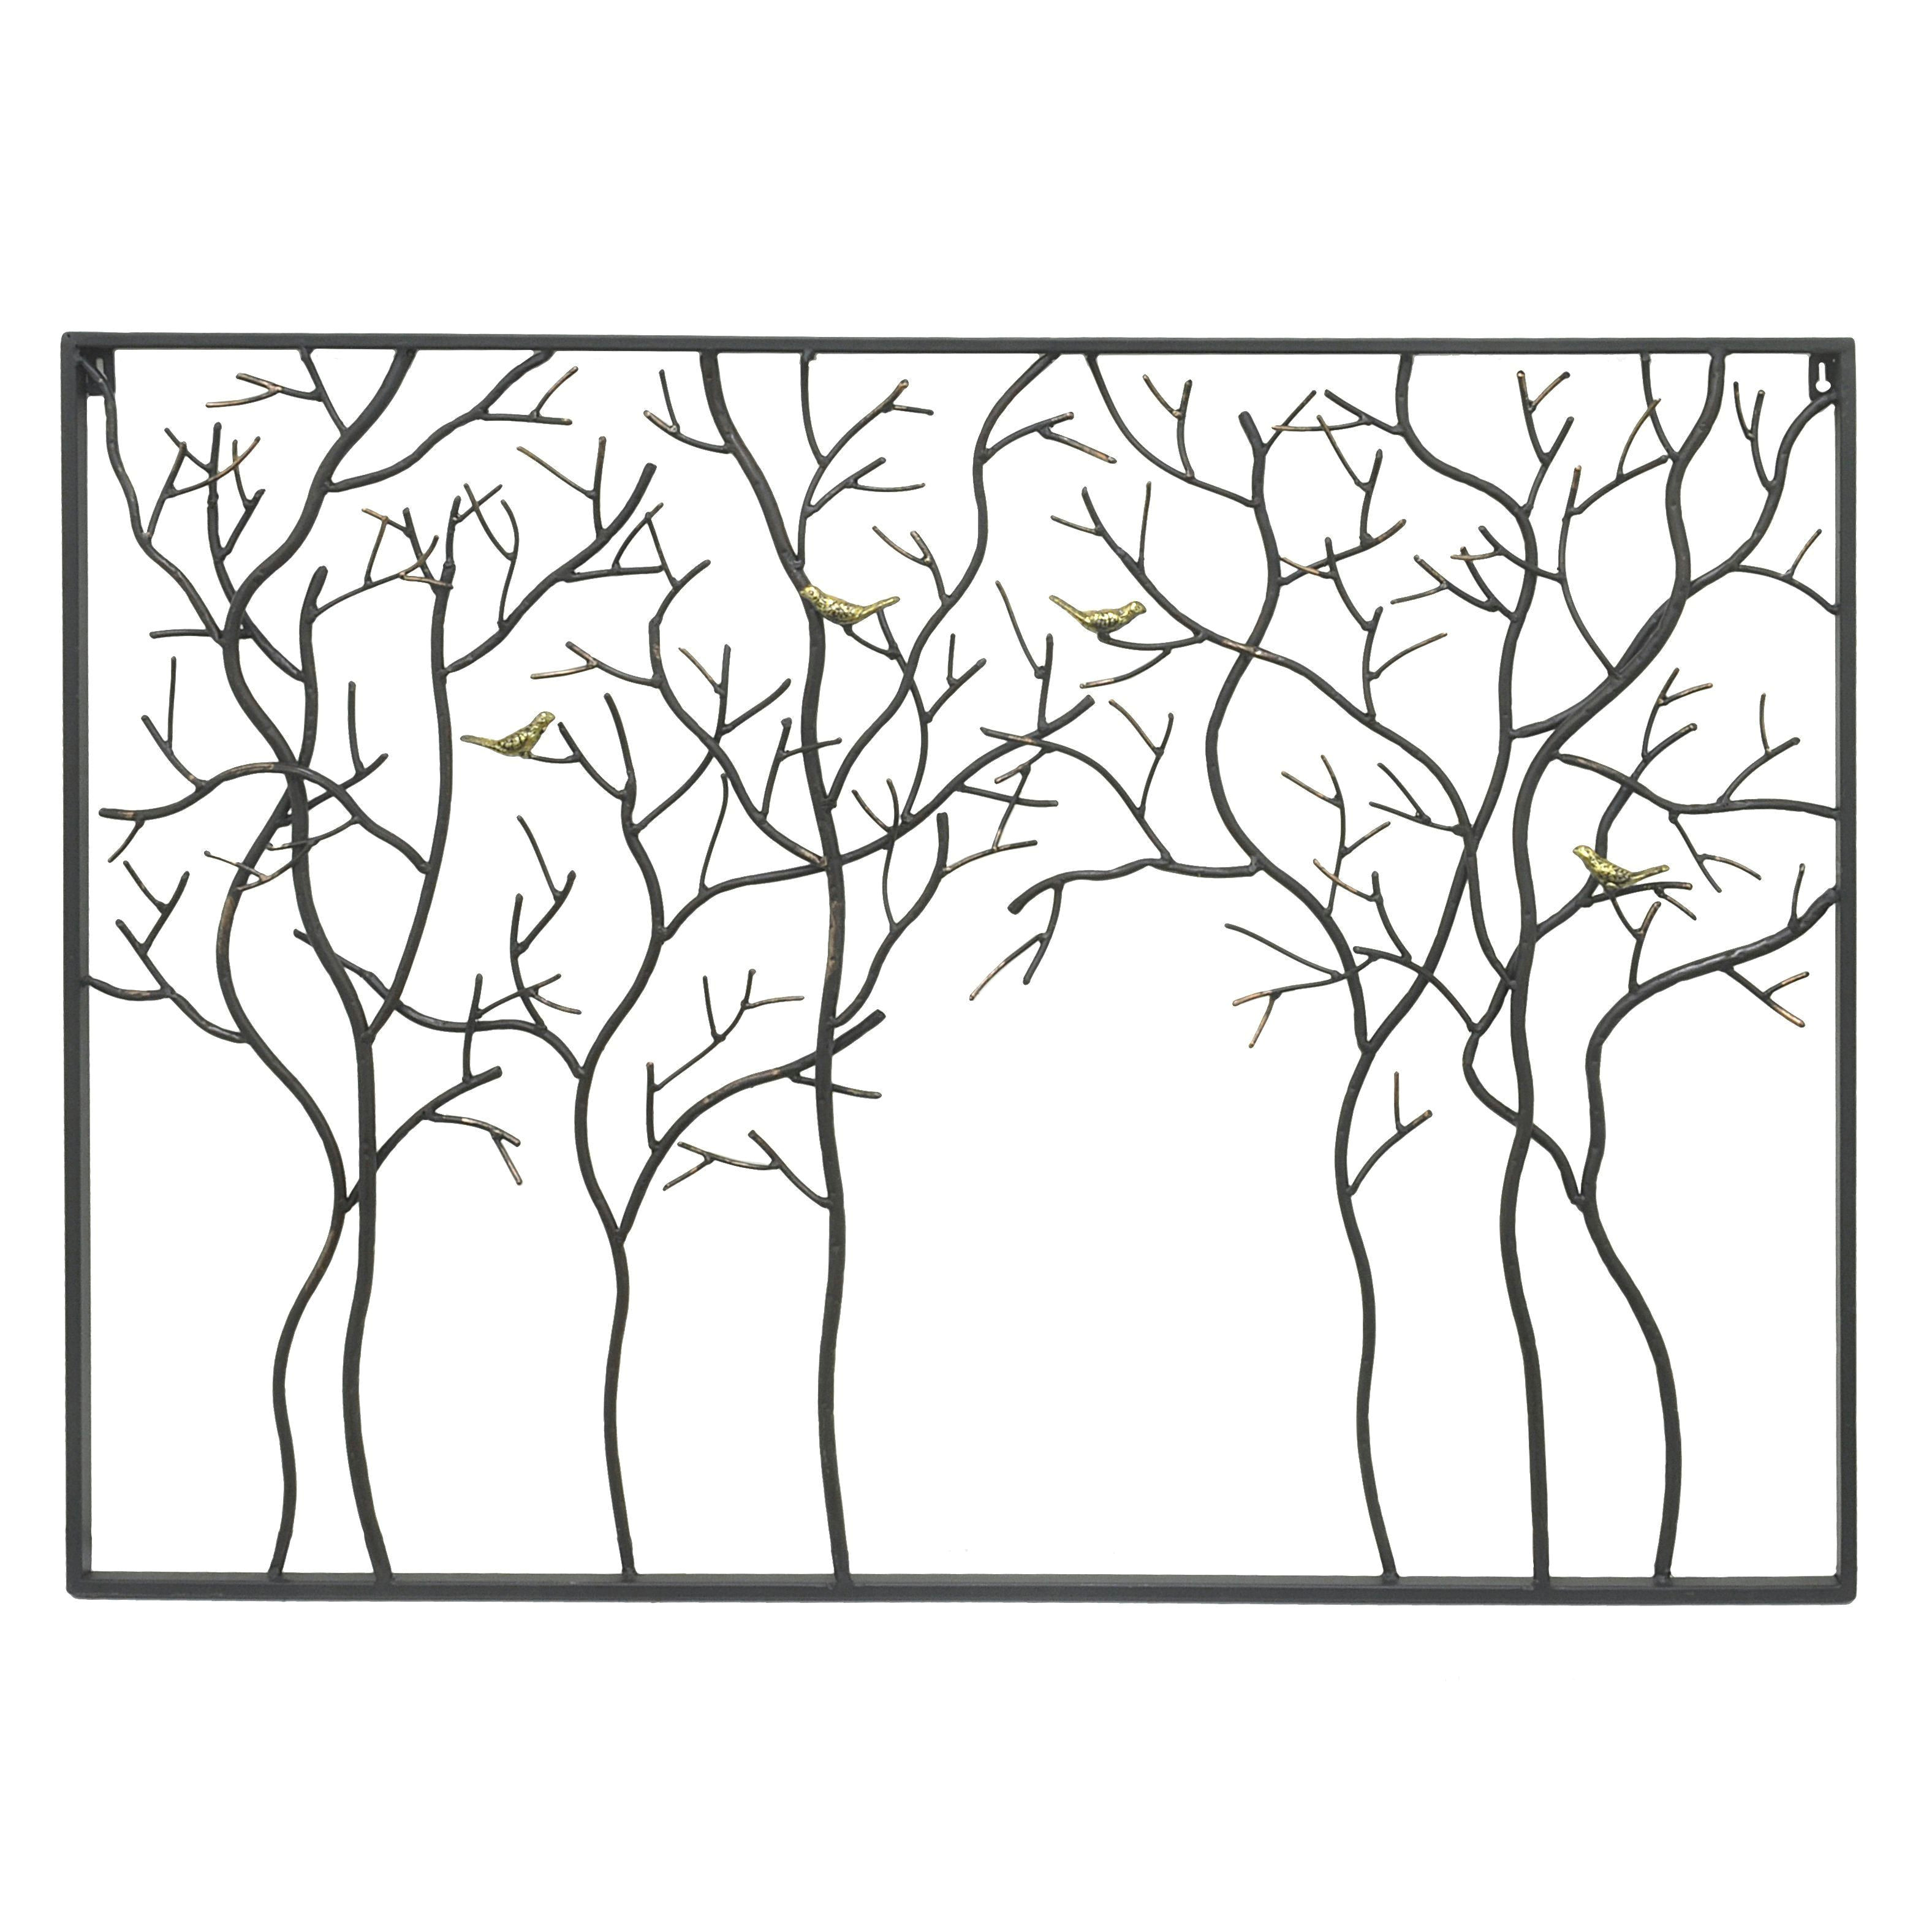 Drawing Of Three Hands Three Hands 32434 Black Metal Trees with Birds Wall Sculpture Metal